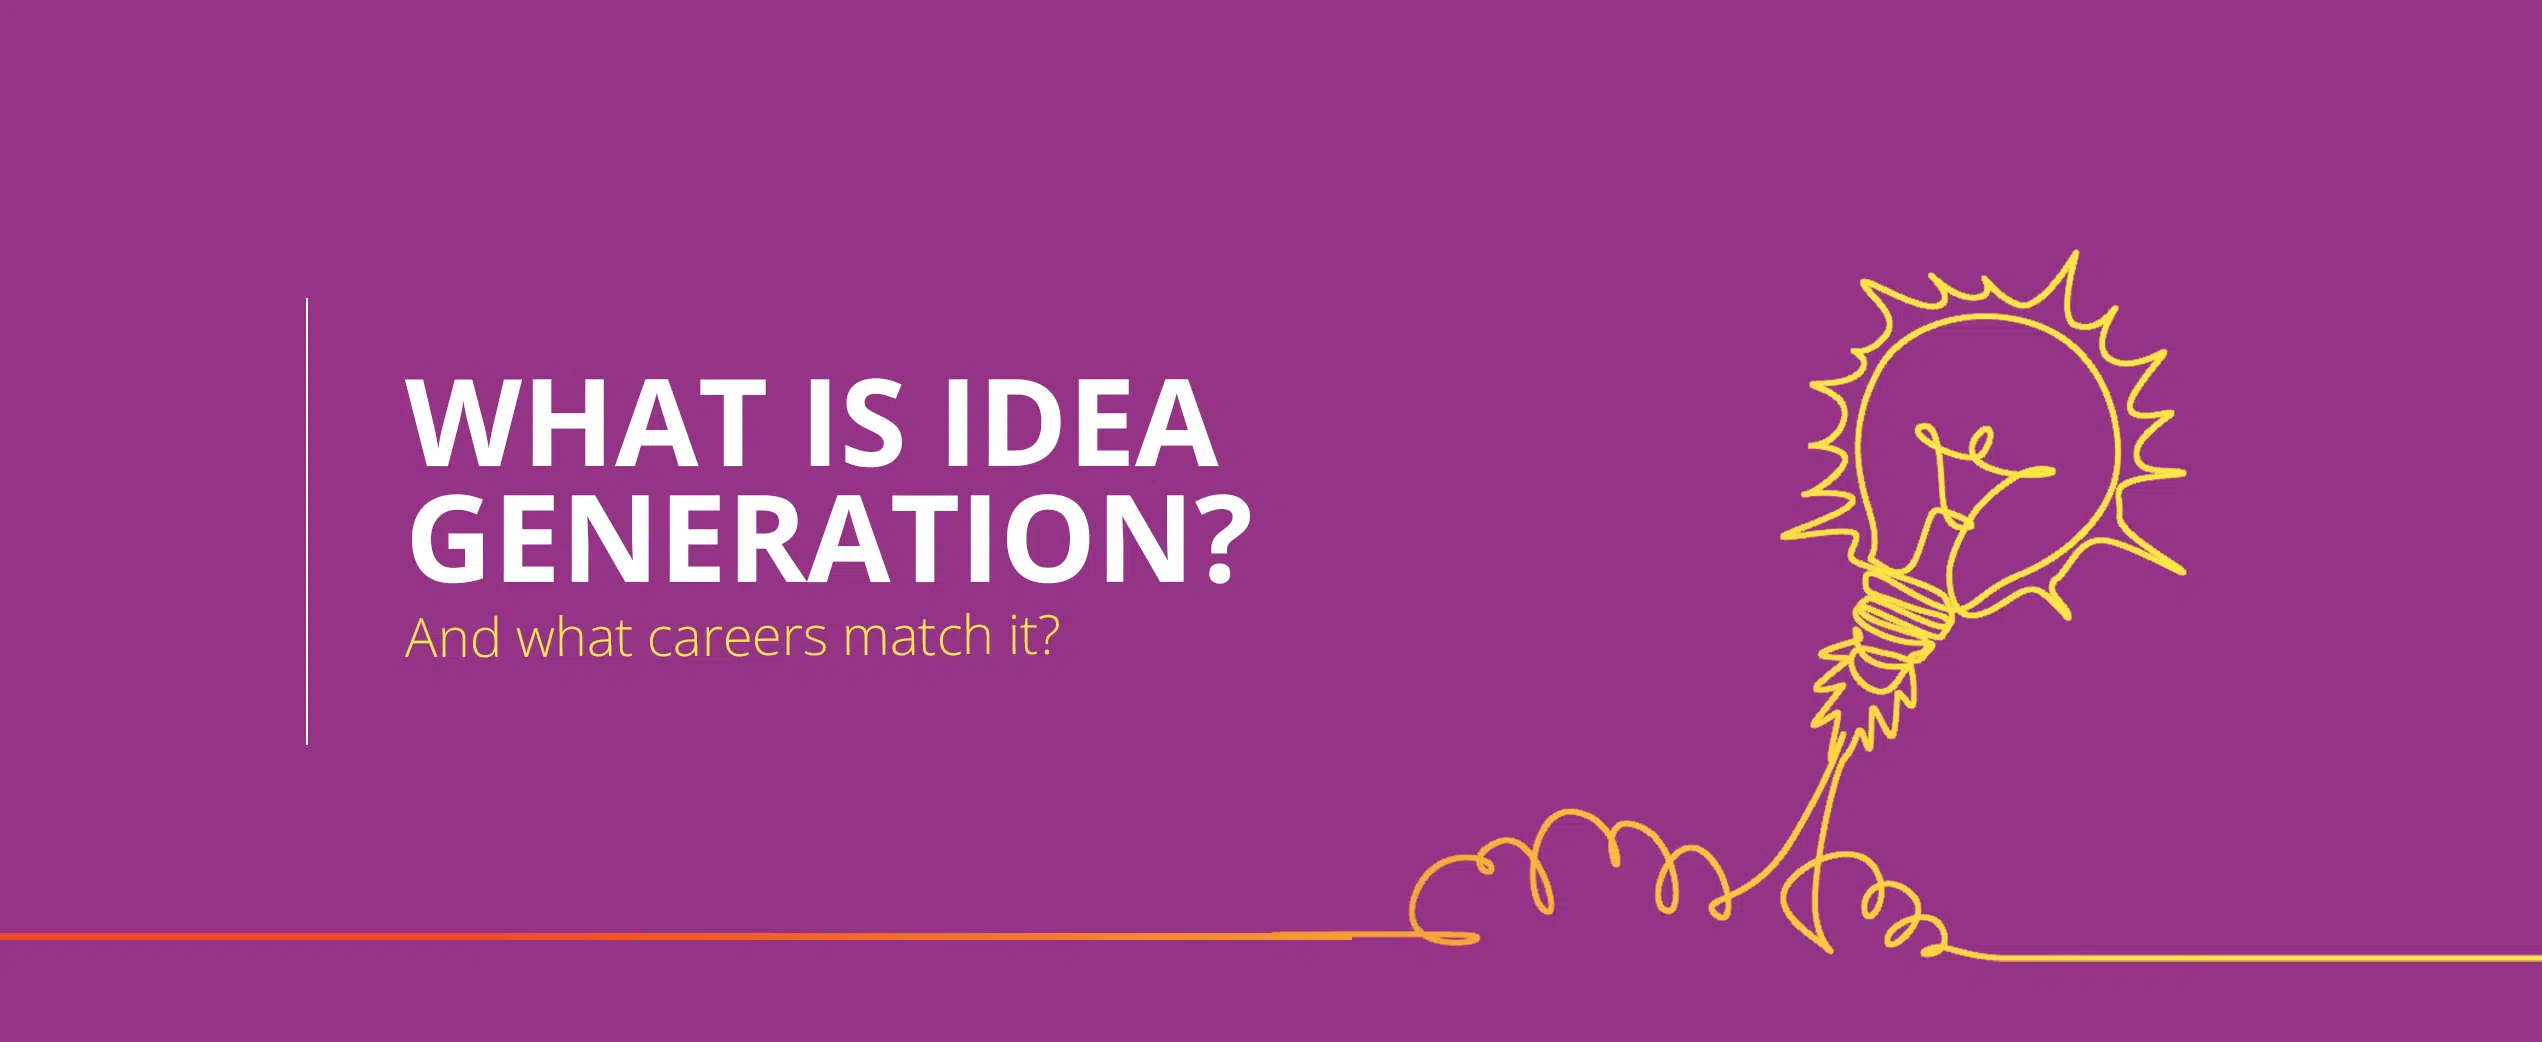 What is idea generation? And what careers match it?